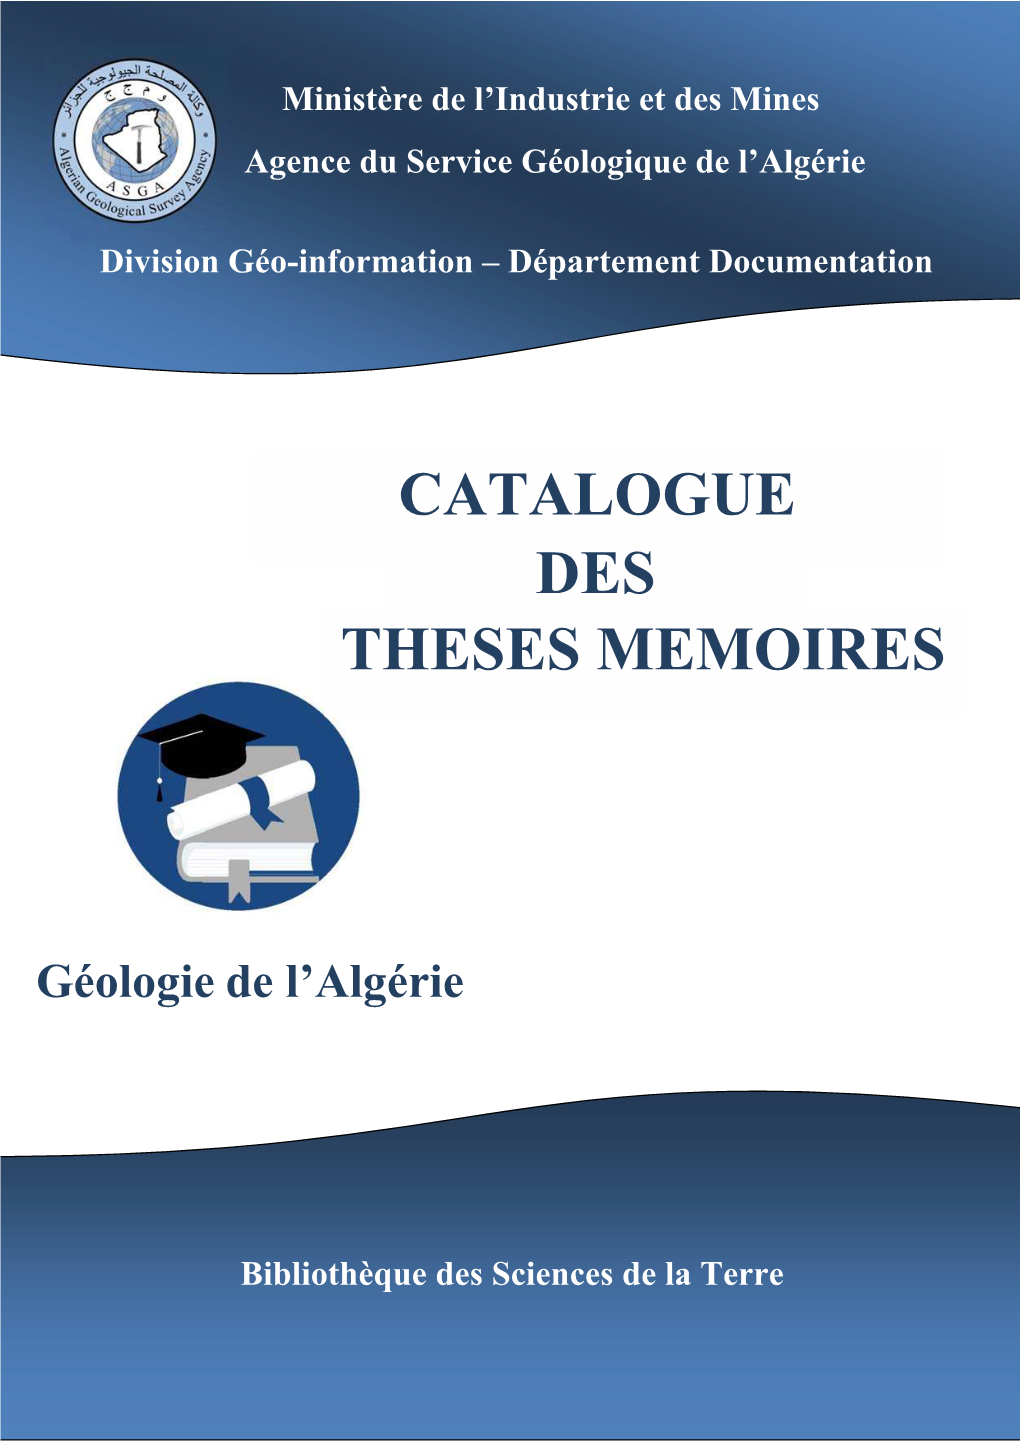 Catalogue Theses Memoires